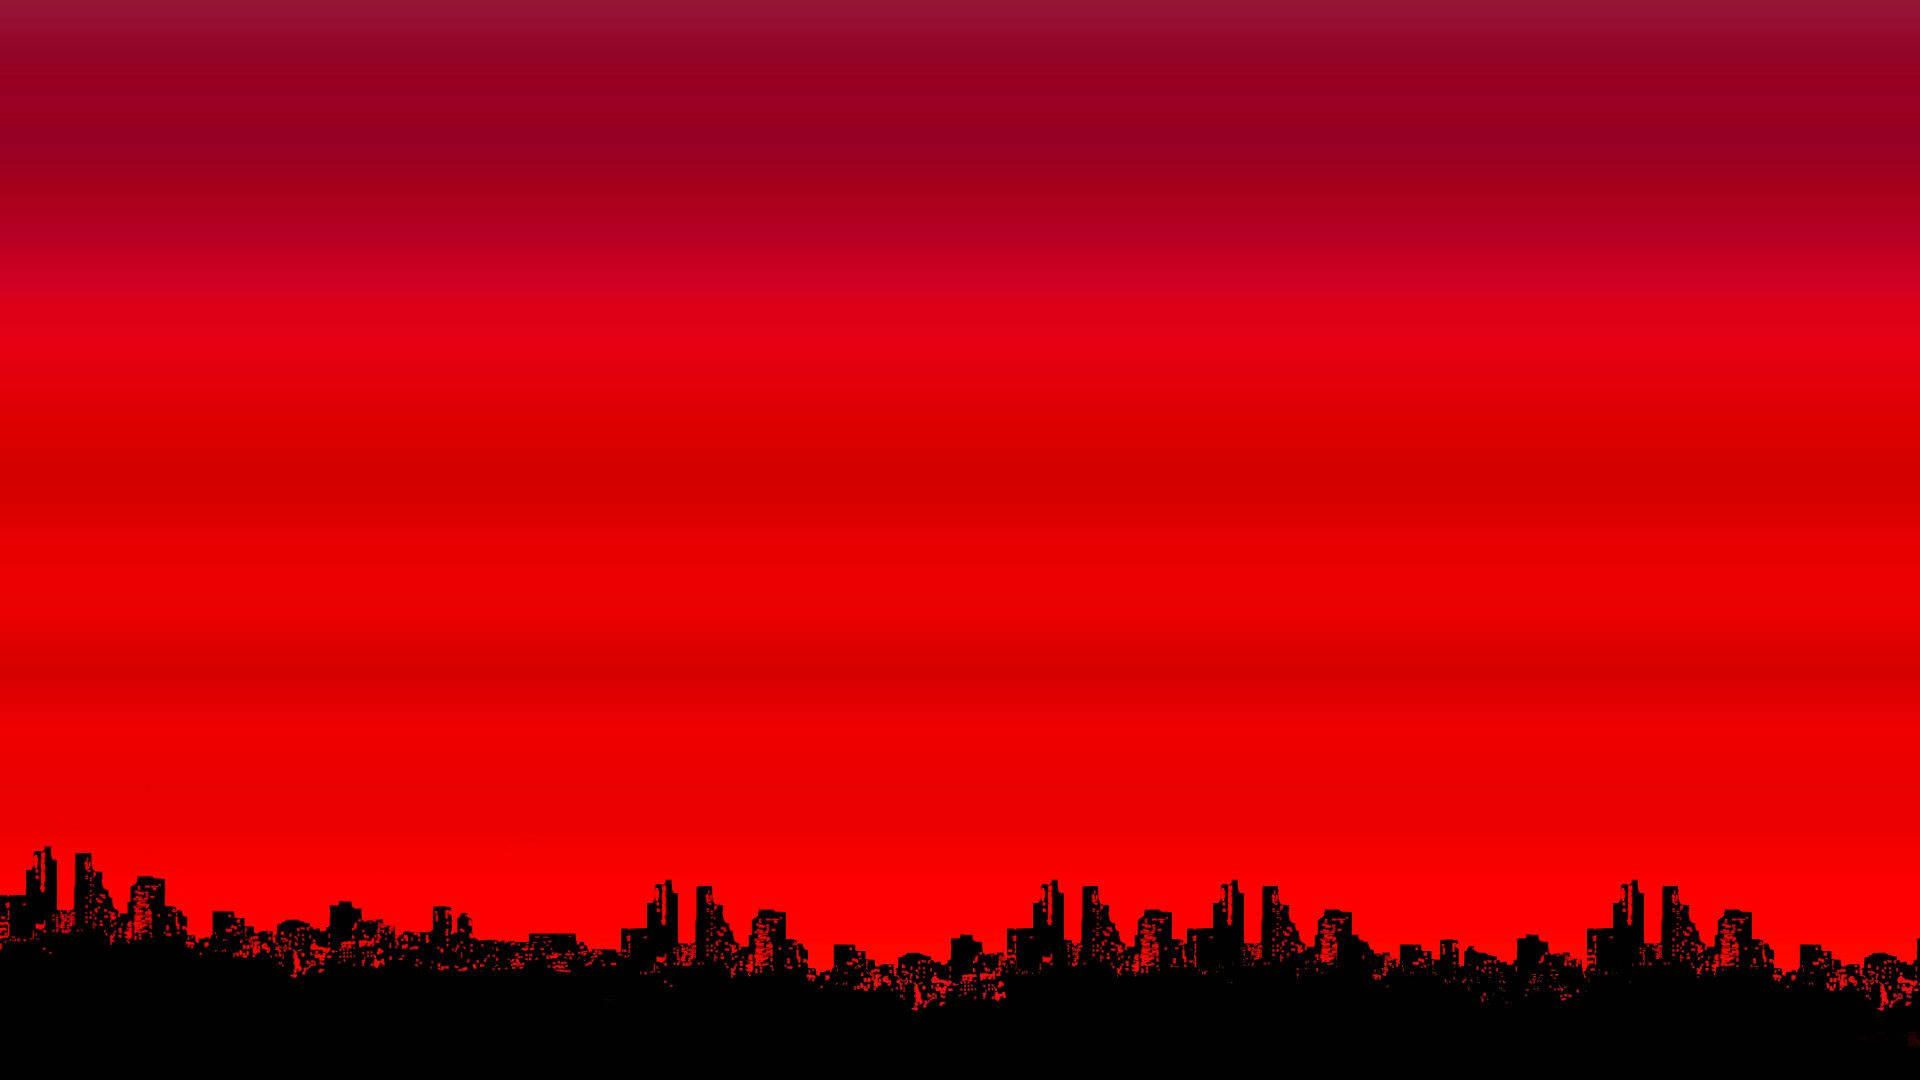 Black And Red City Silhouette On Red Sky Background